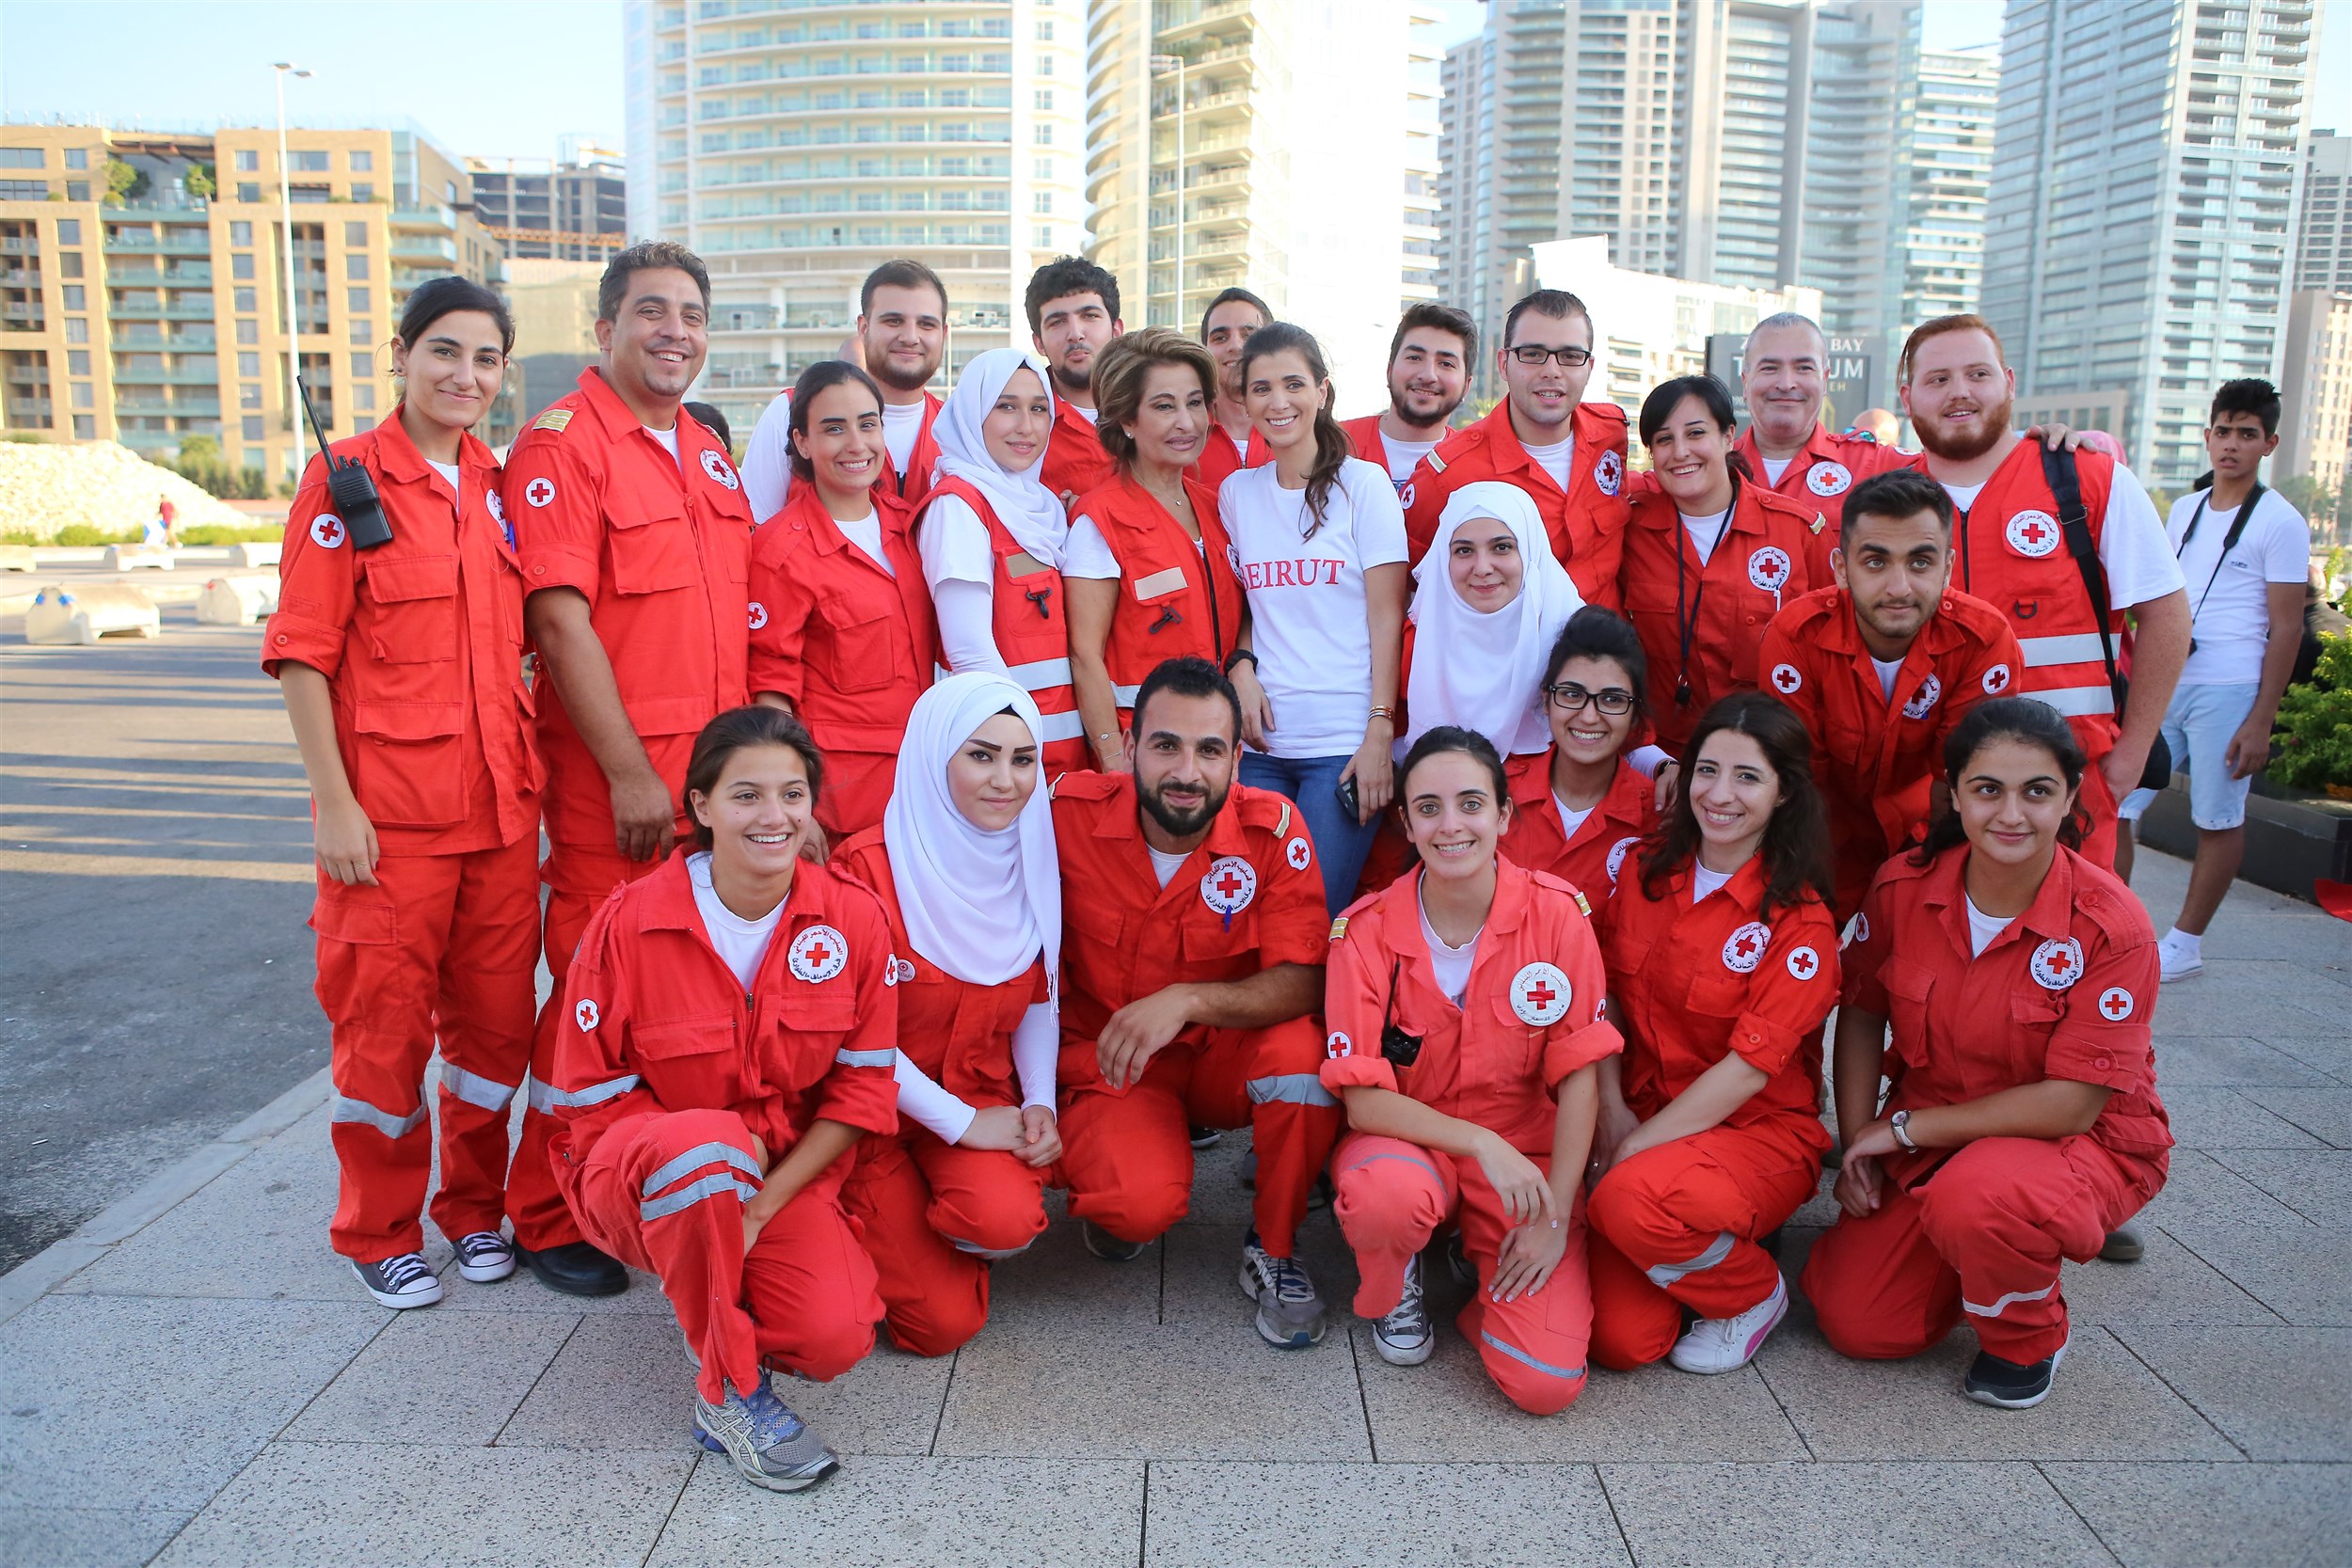 iaaf will forever be grateful to the lebanese red cross who supported our journey in every step